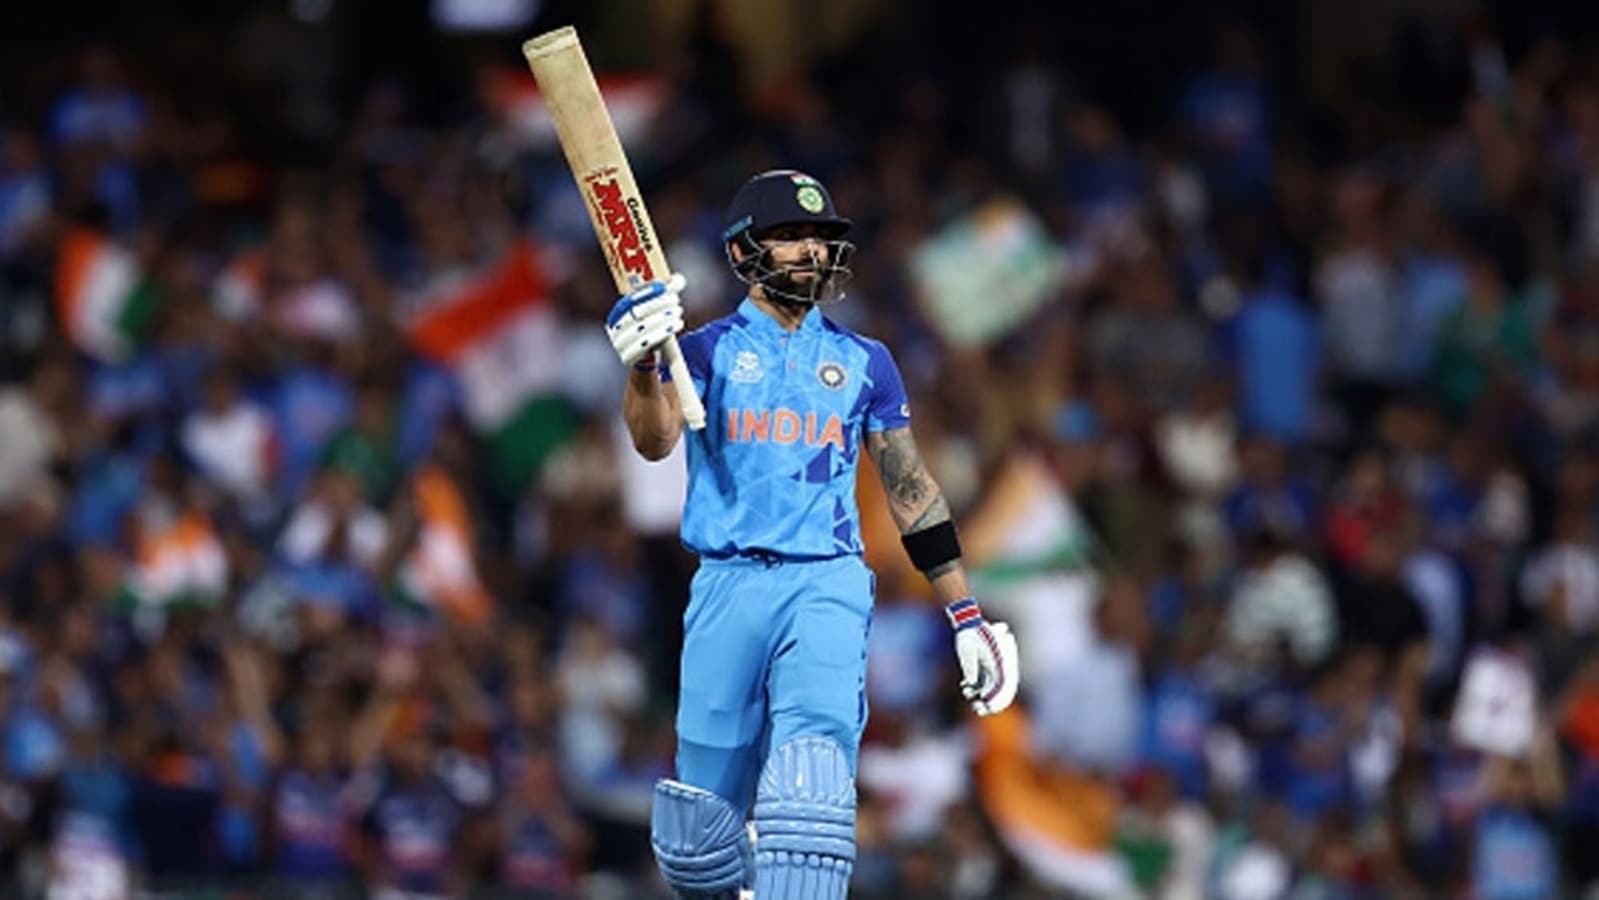 happy-birthday-virat-kohli-the-king-is-back-making-up-for-lost-time-with-a-world-cup-to-remember